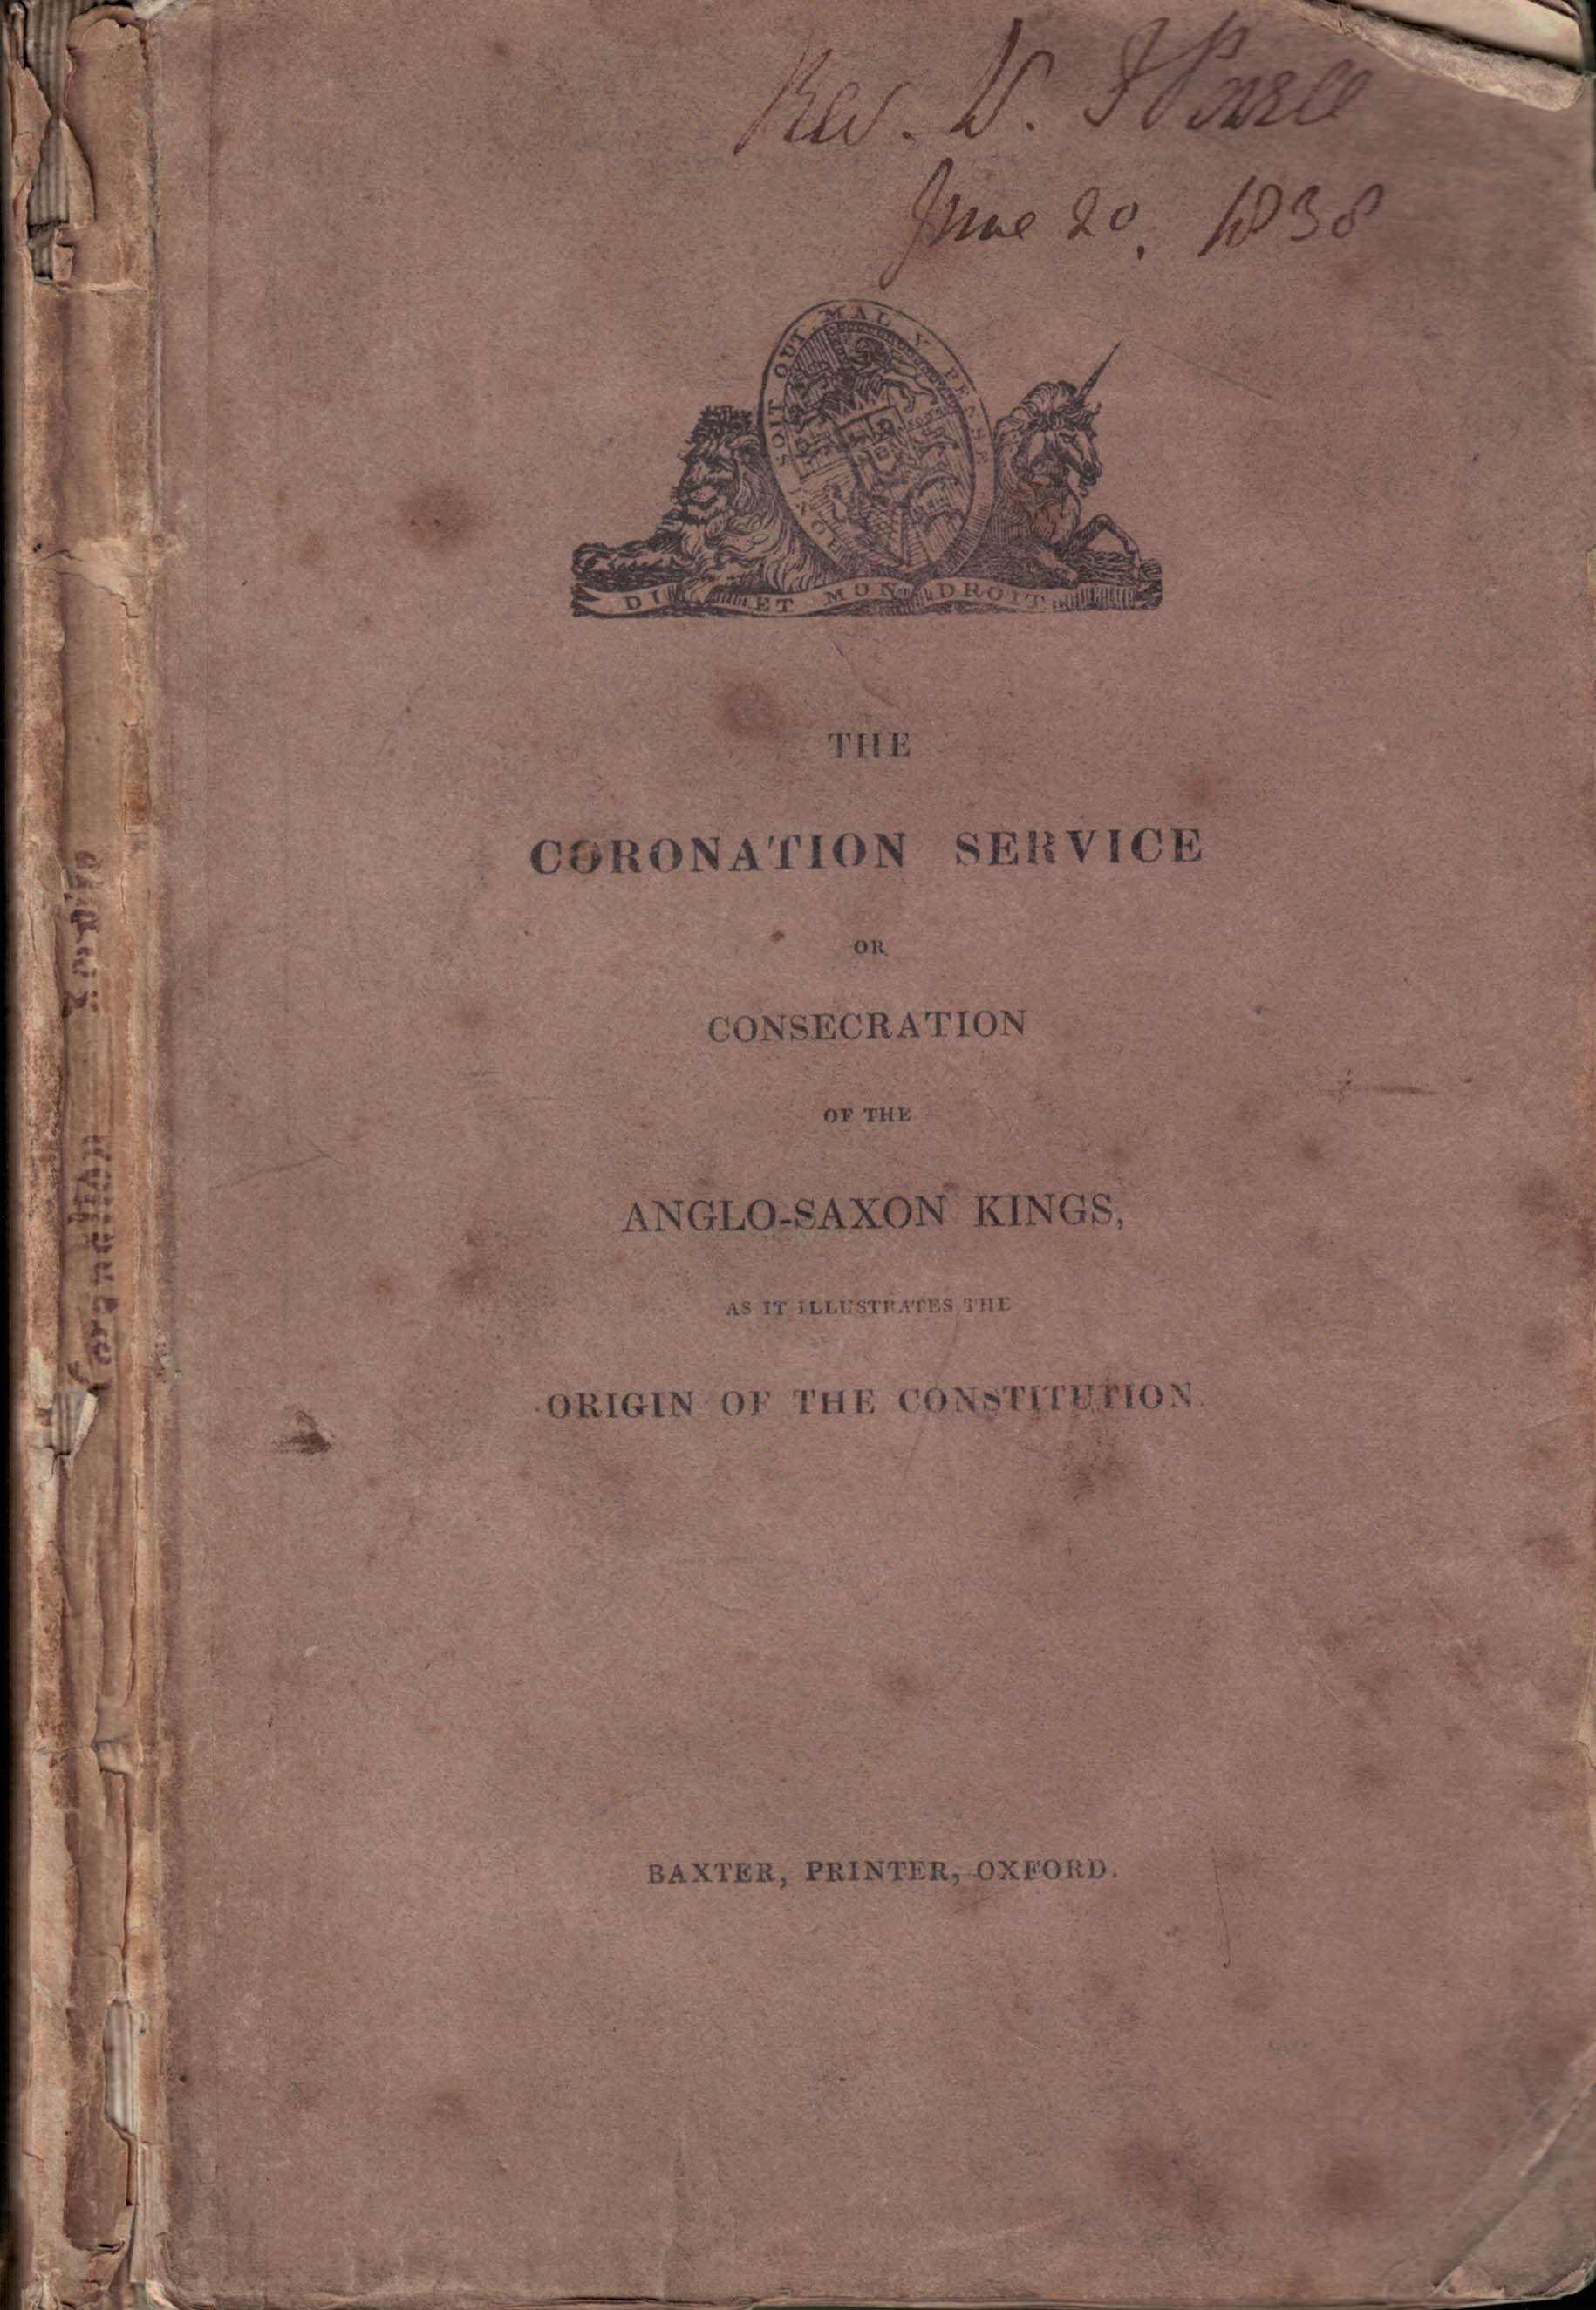 The Coronation Service or Consecration of the Anglo-Saxon Kings, as it Illustrates the Origin of the Constitution